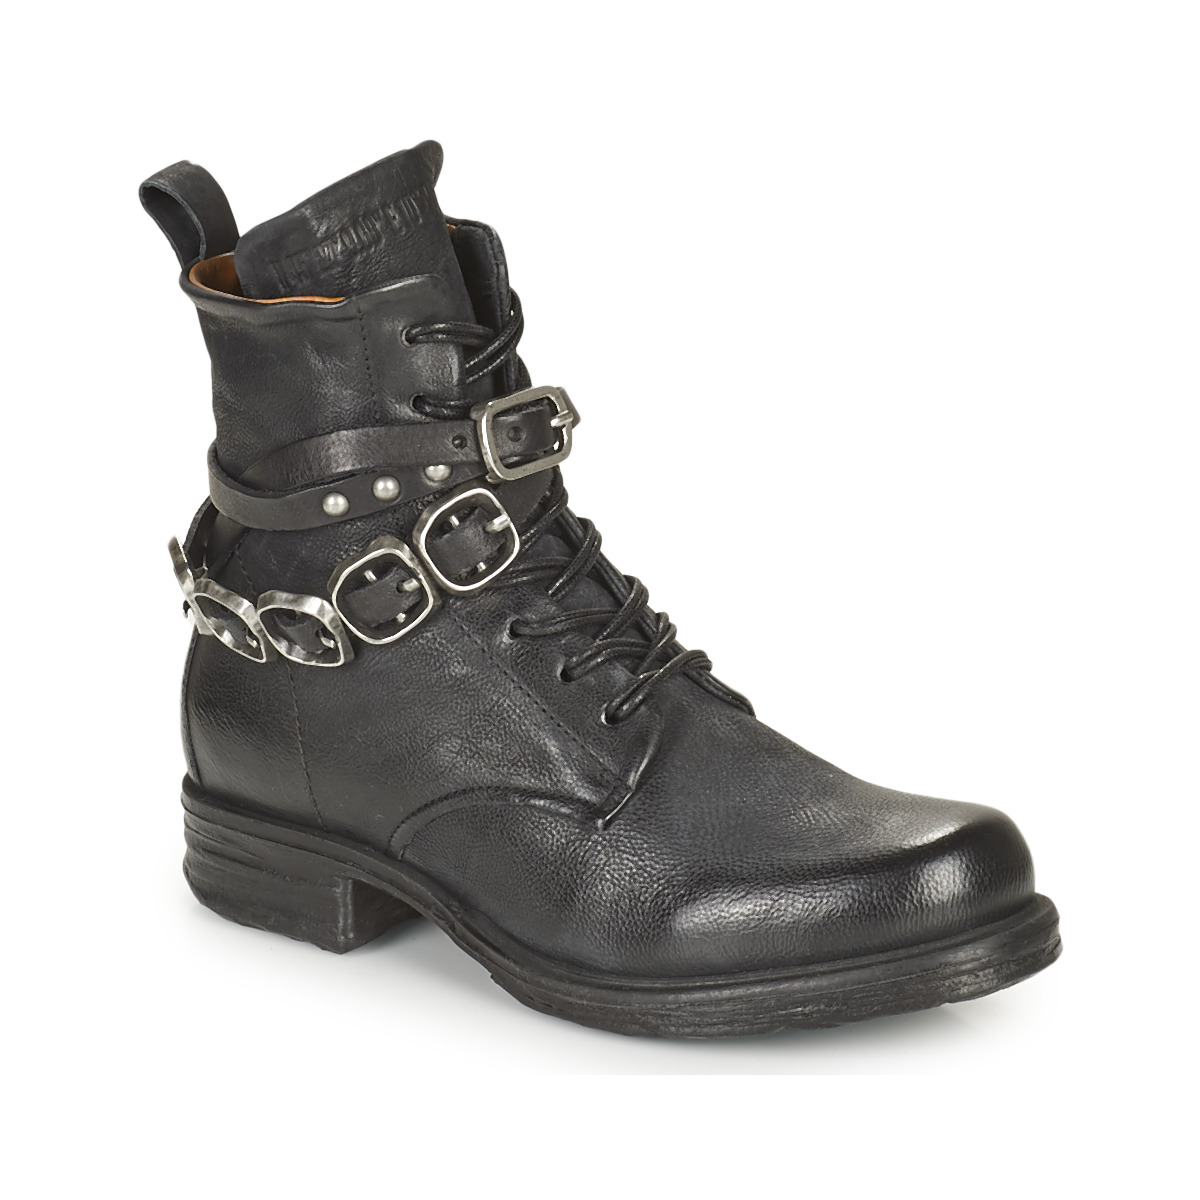 airstep / a.s.98  saintec bride  women's mid boots in black